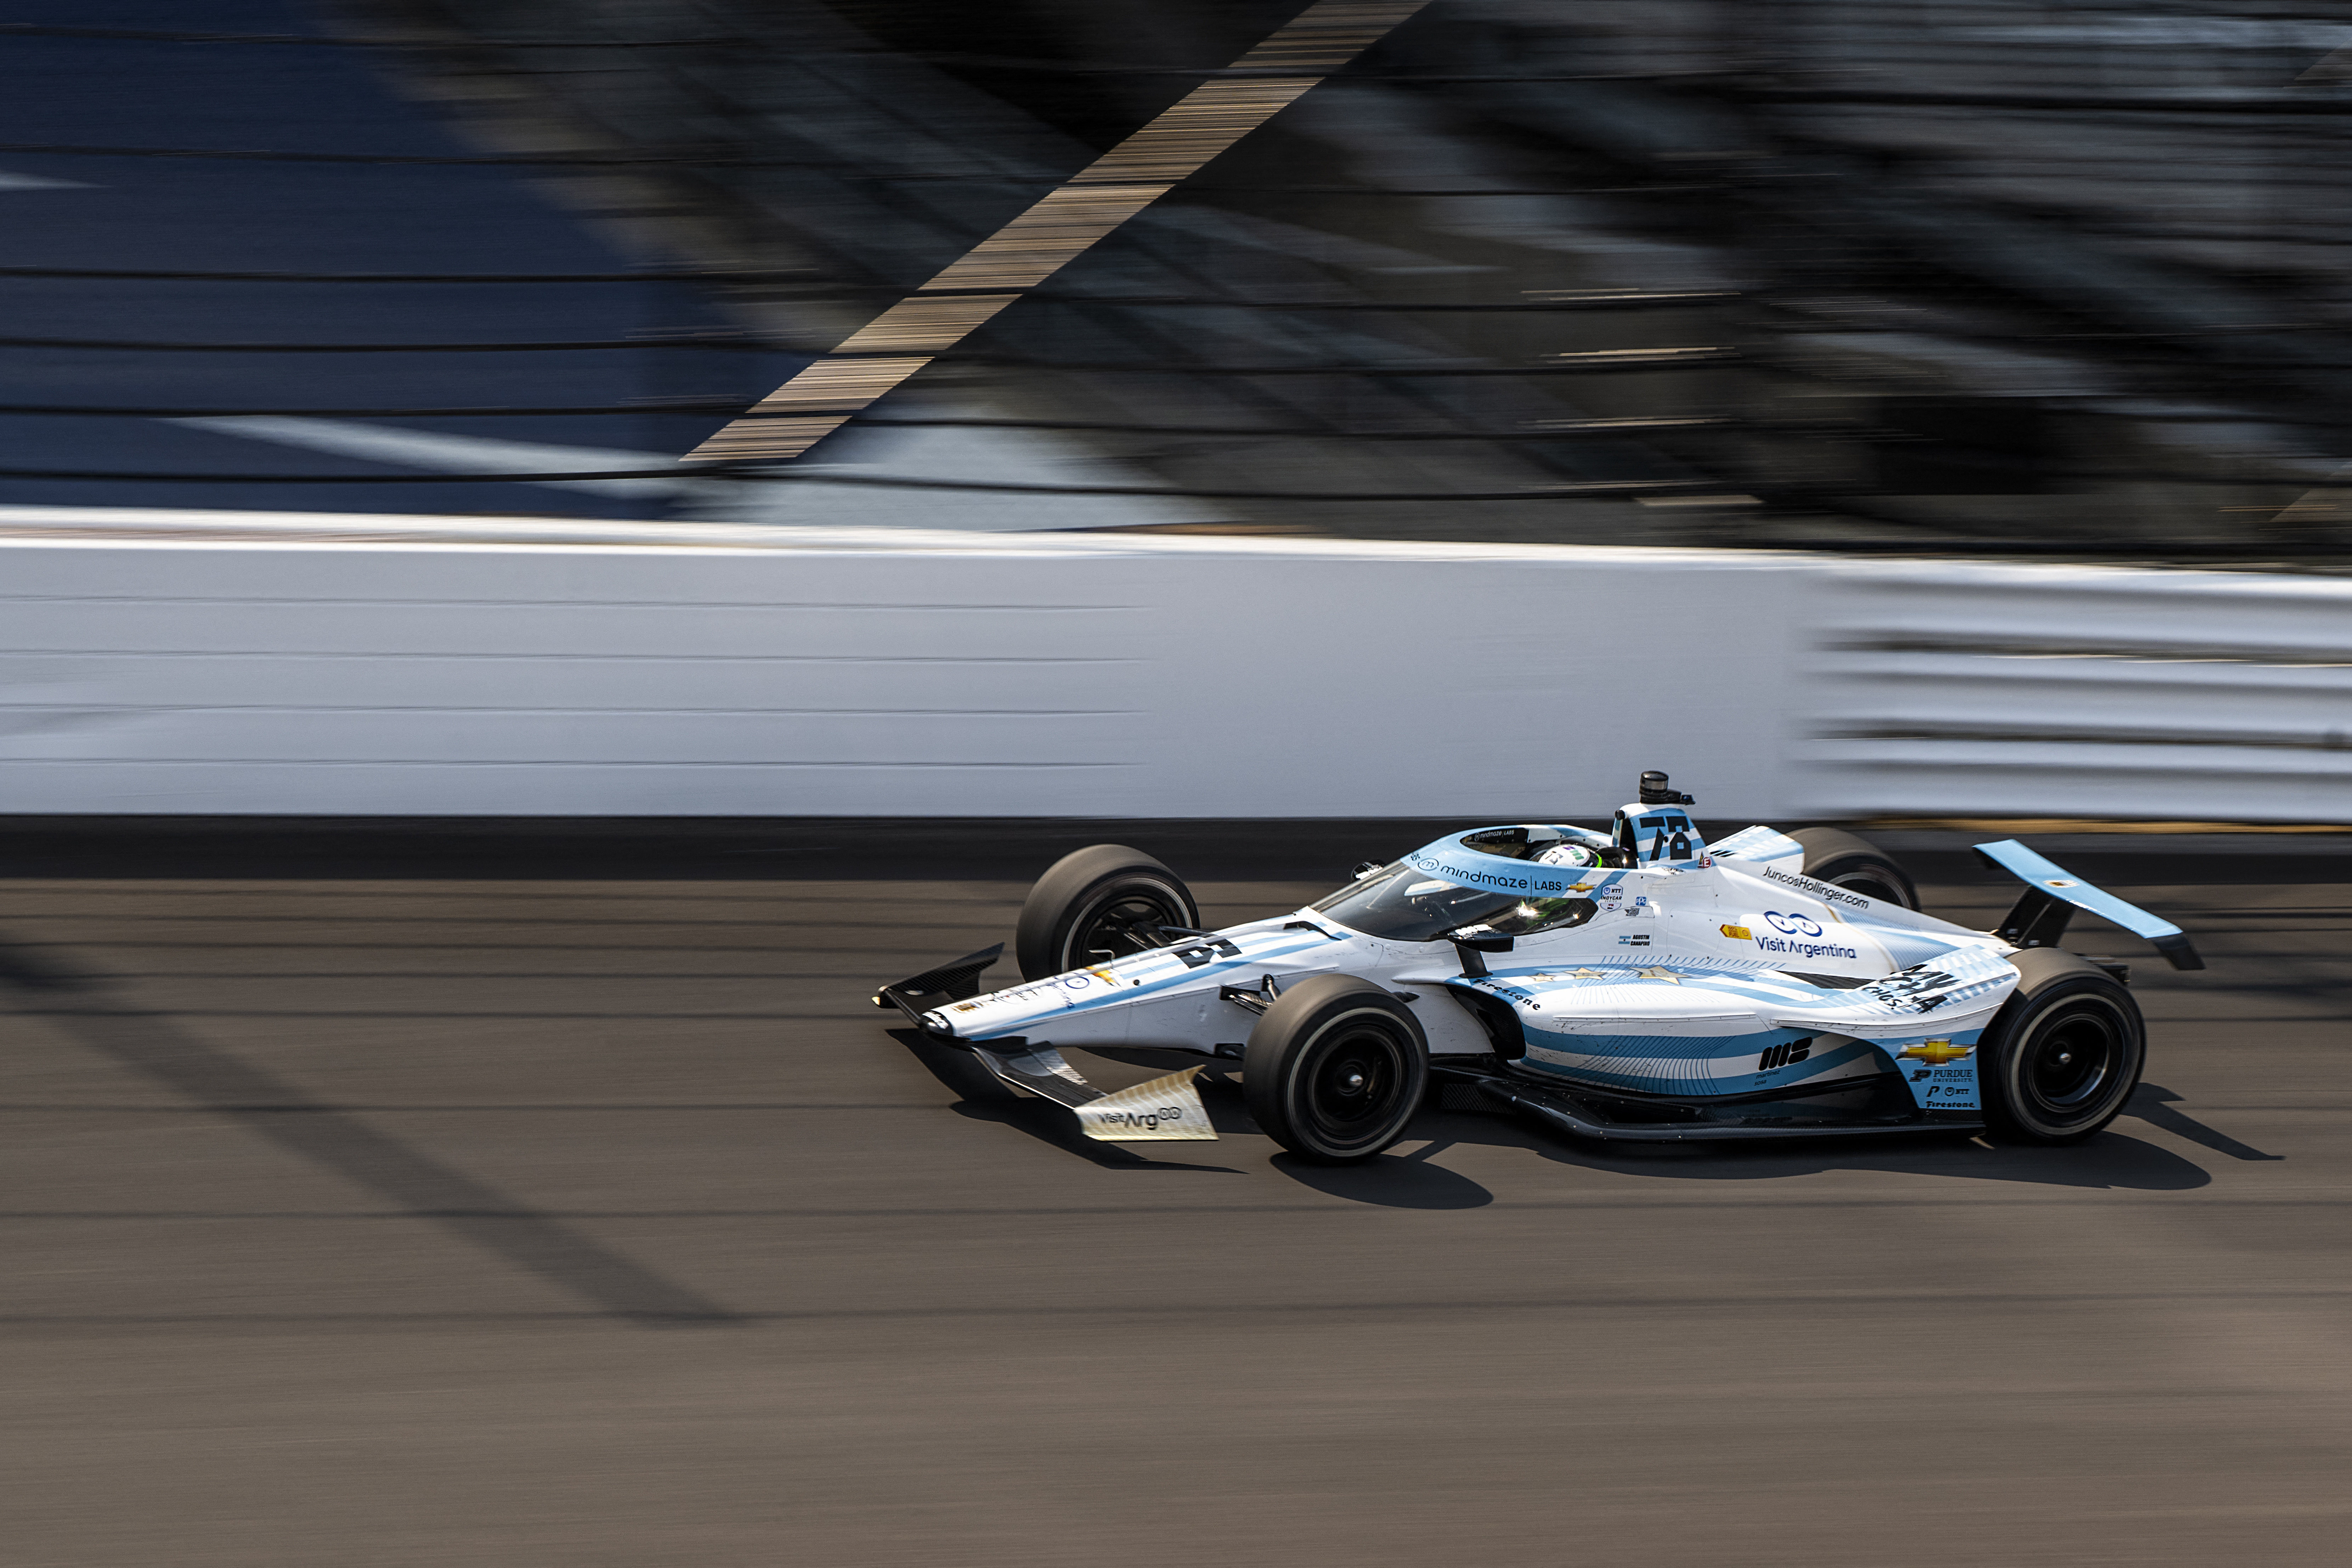 May 17, 2023; Speedway, Indiana, USA; Juncos Hollinger Racing driver Agustin Canapino (78) drives toward turn 1 during Indy500 practice at the Indianapolis Motor Speedway. Mandatory Credit: Marc Lebryk-USA TODAY Sports